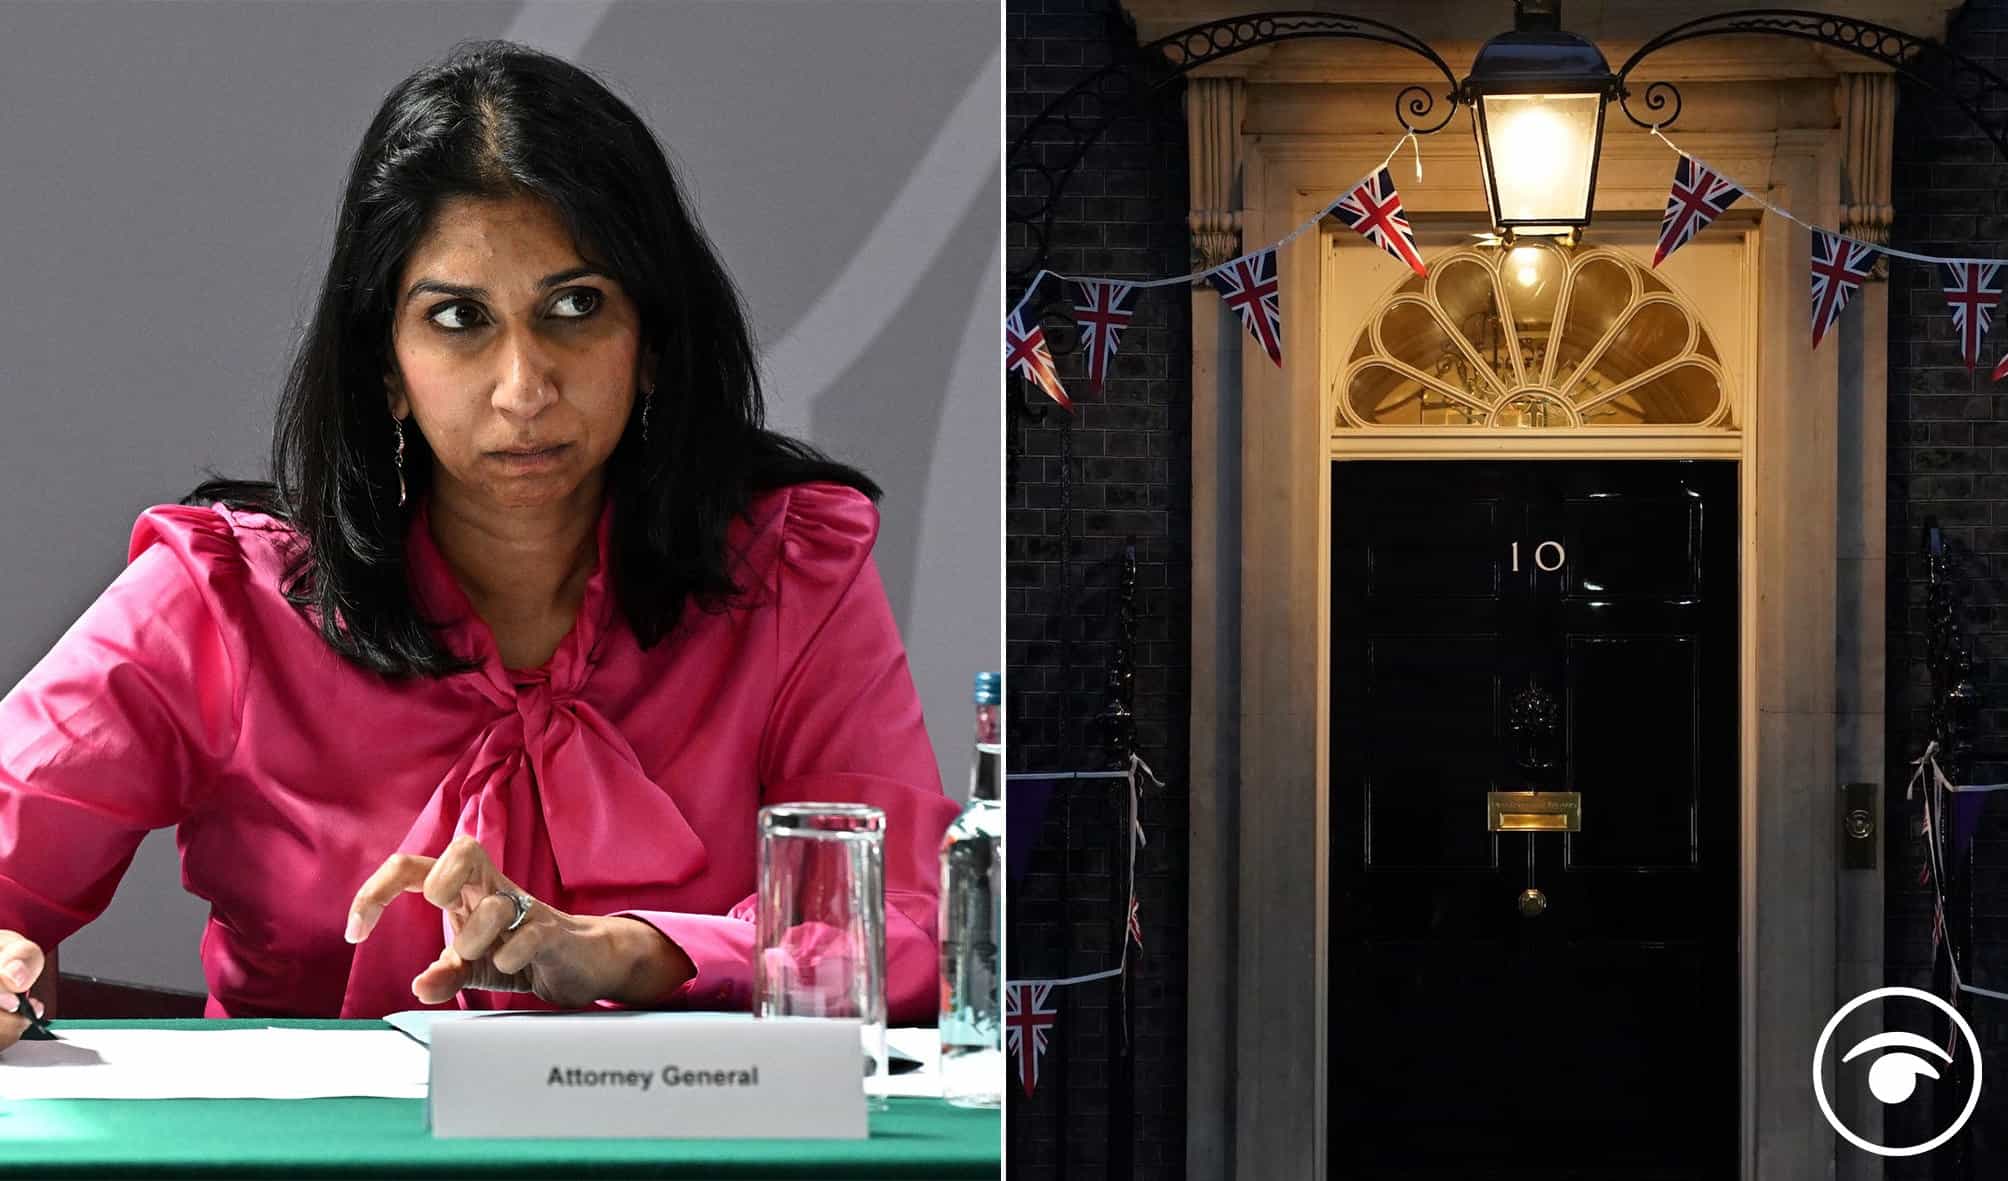 Watch: Suella Braverman’s cringe response to losing out in race to become PM